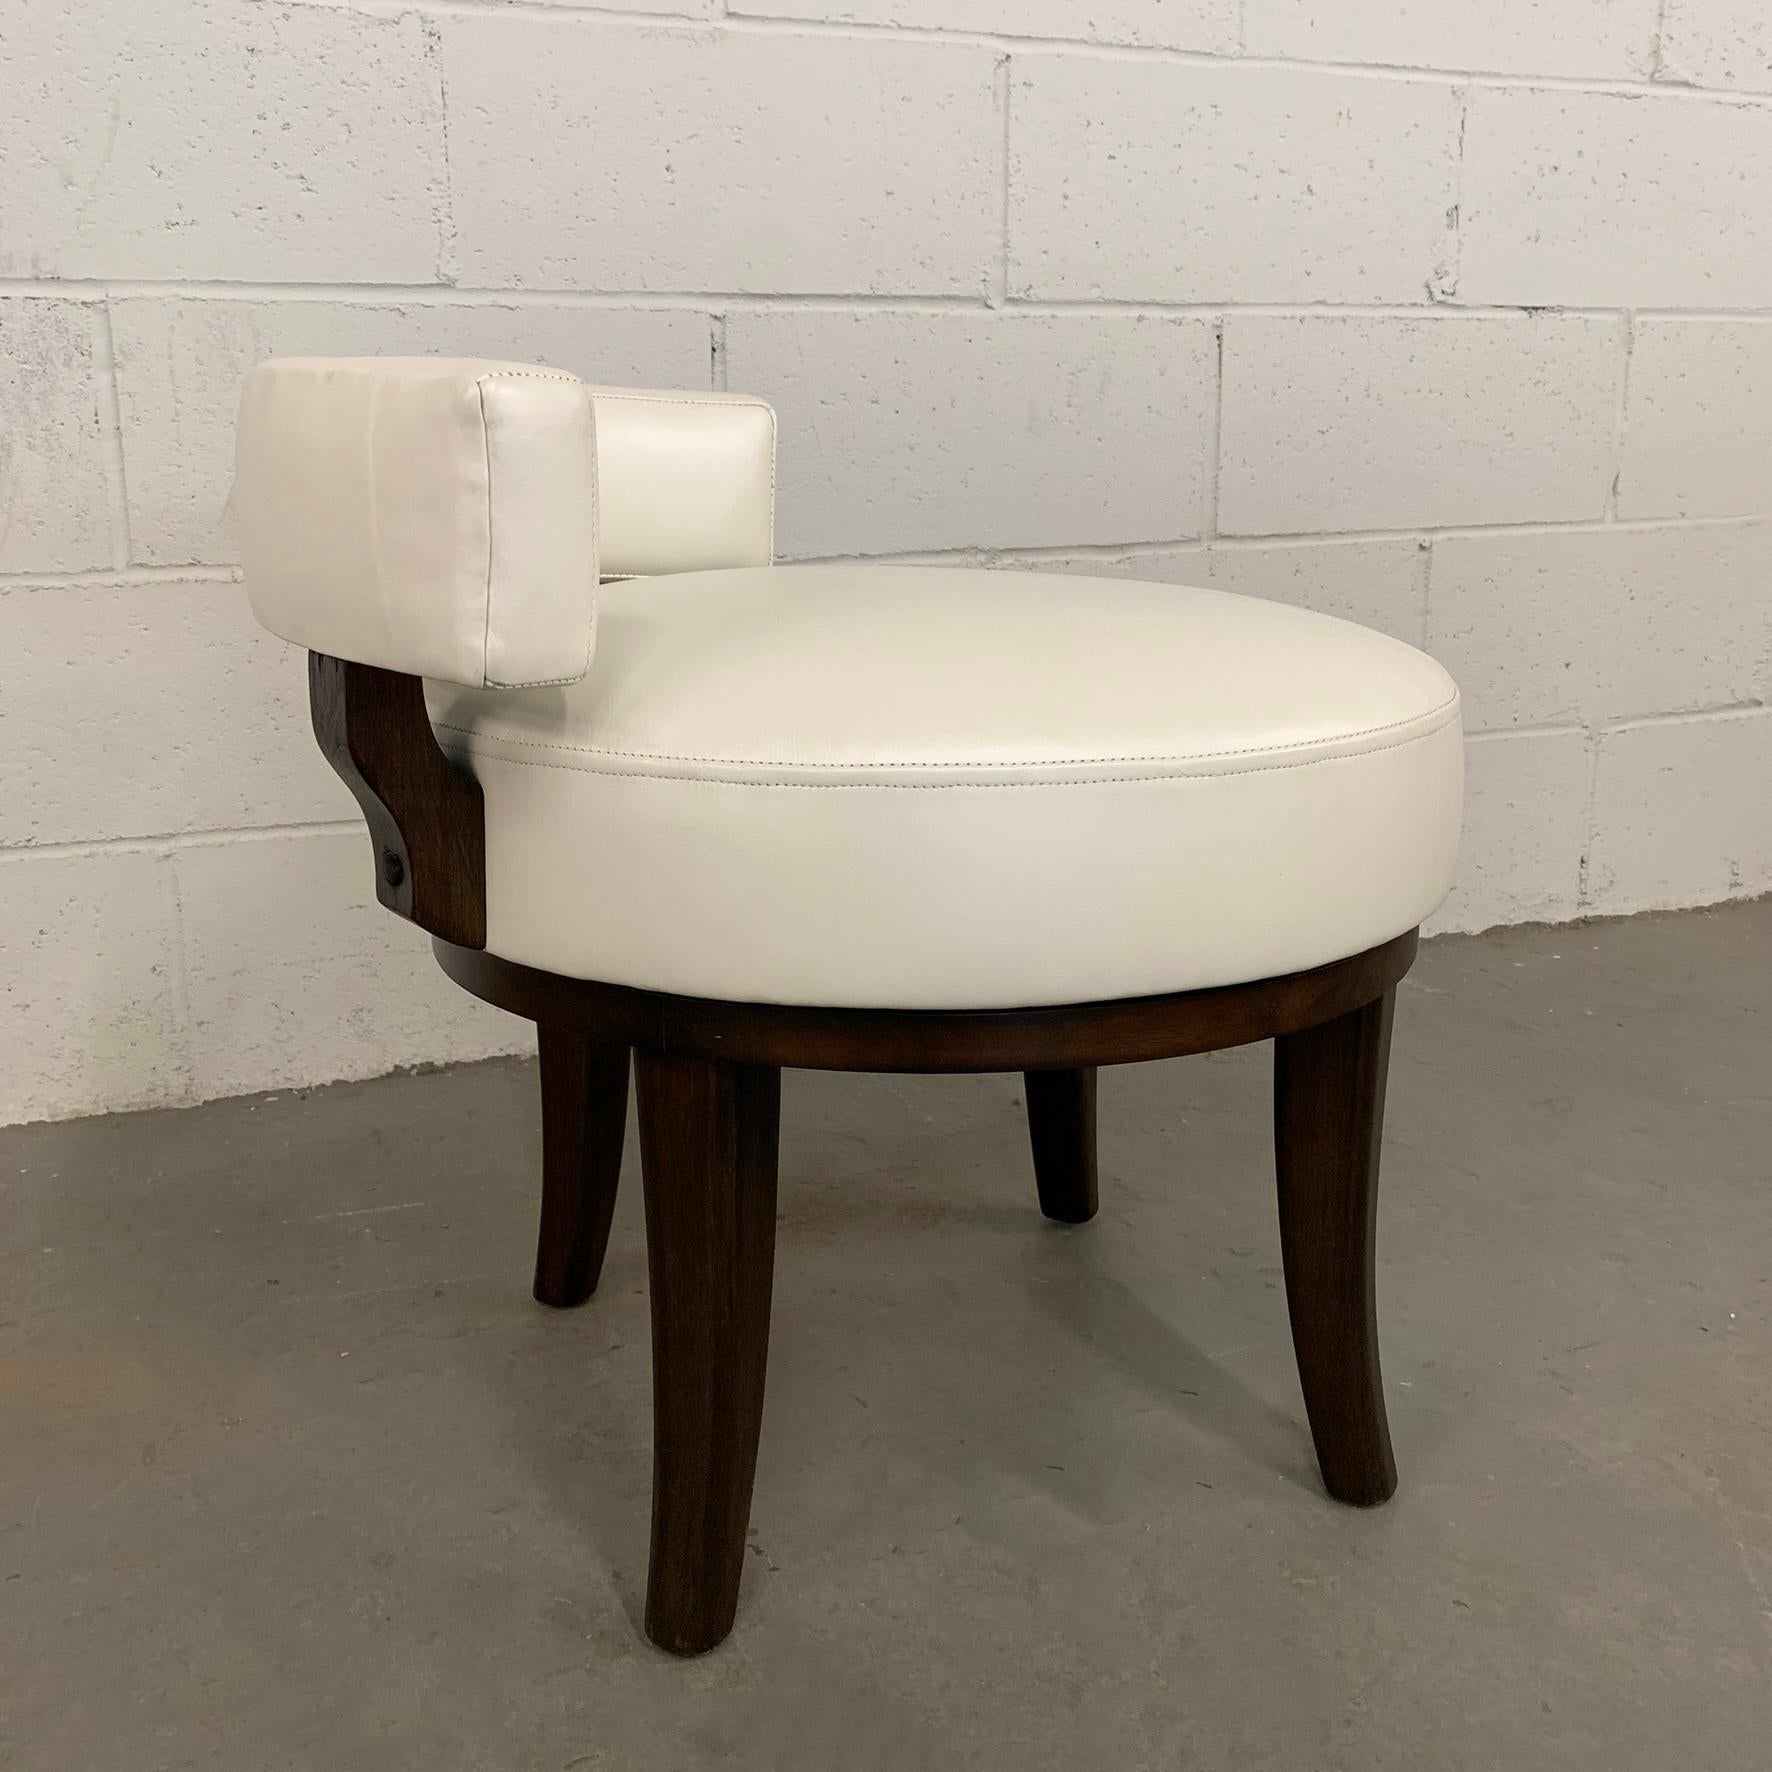 Mid-Century Modern, swivel, vanity chair features a low profile, curved backrest, upholstered in cream leather with lacquered black, mahogany frame. The seat width is 20 inches.